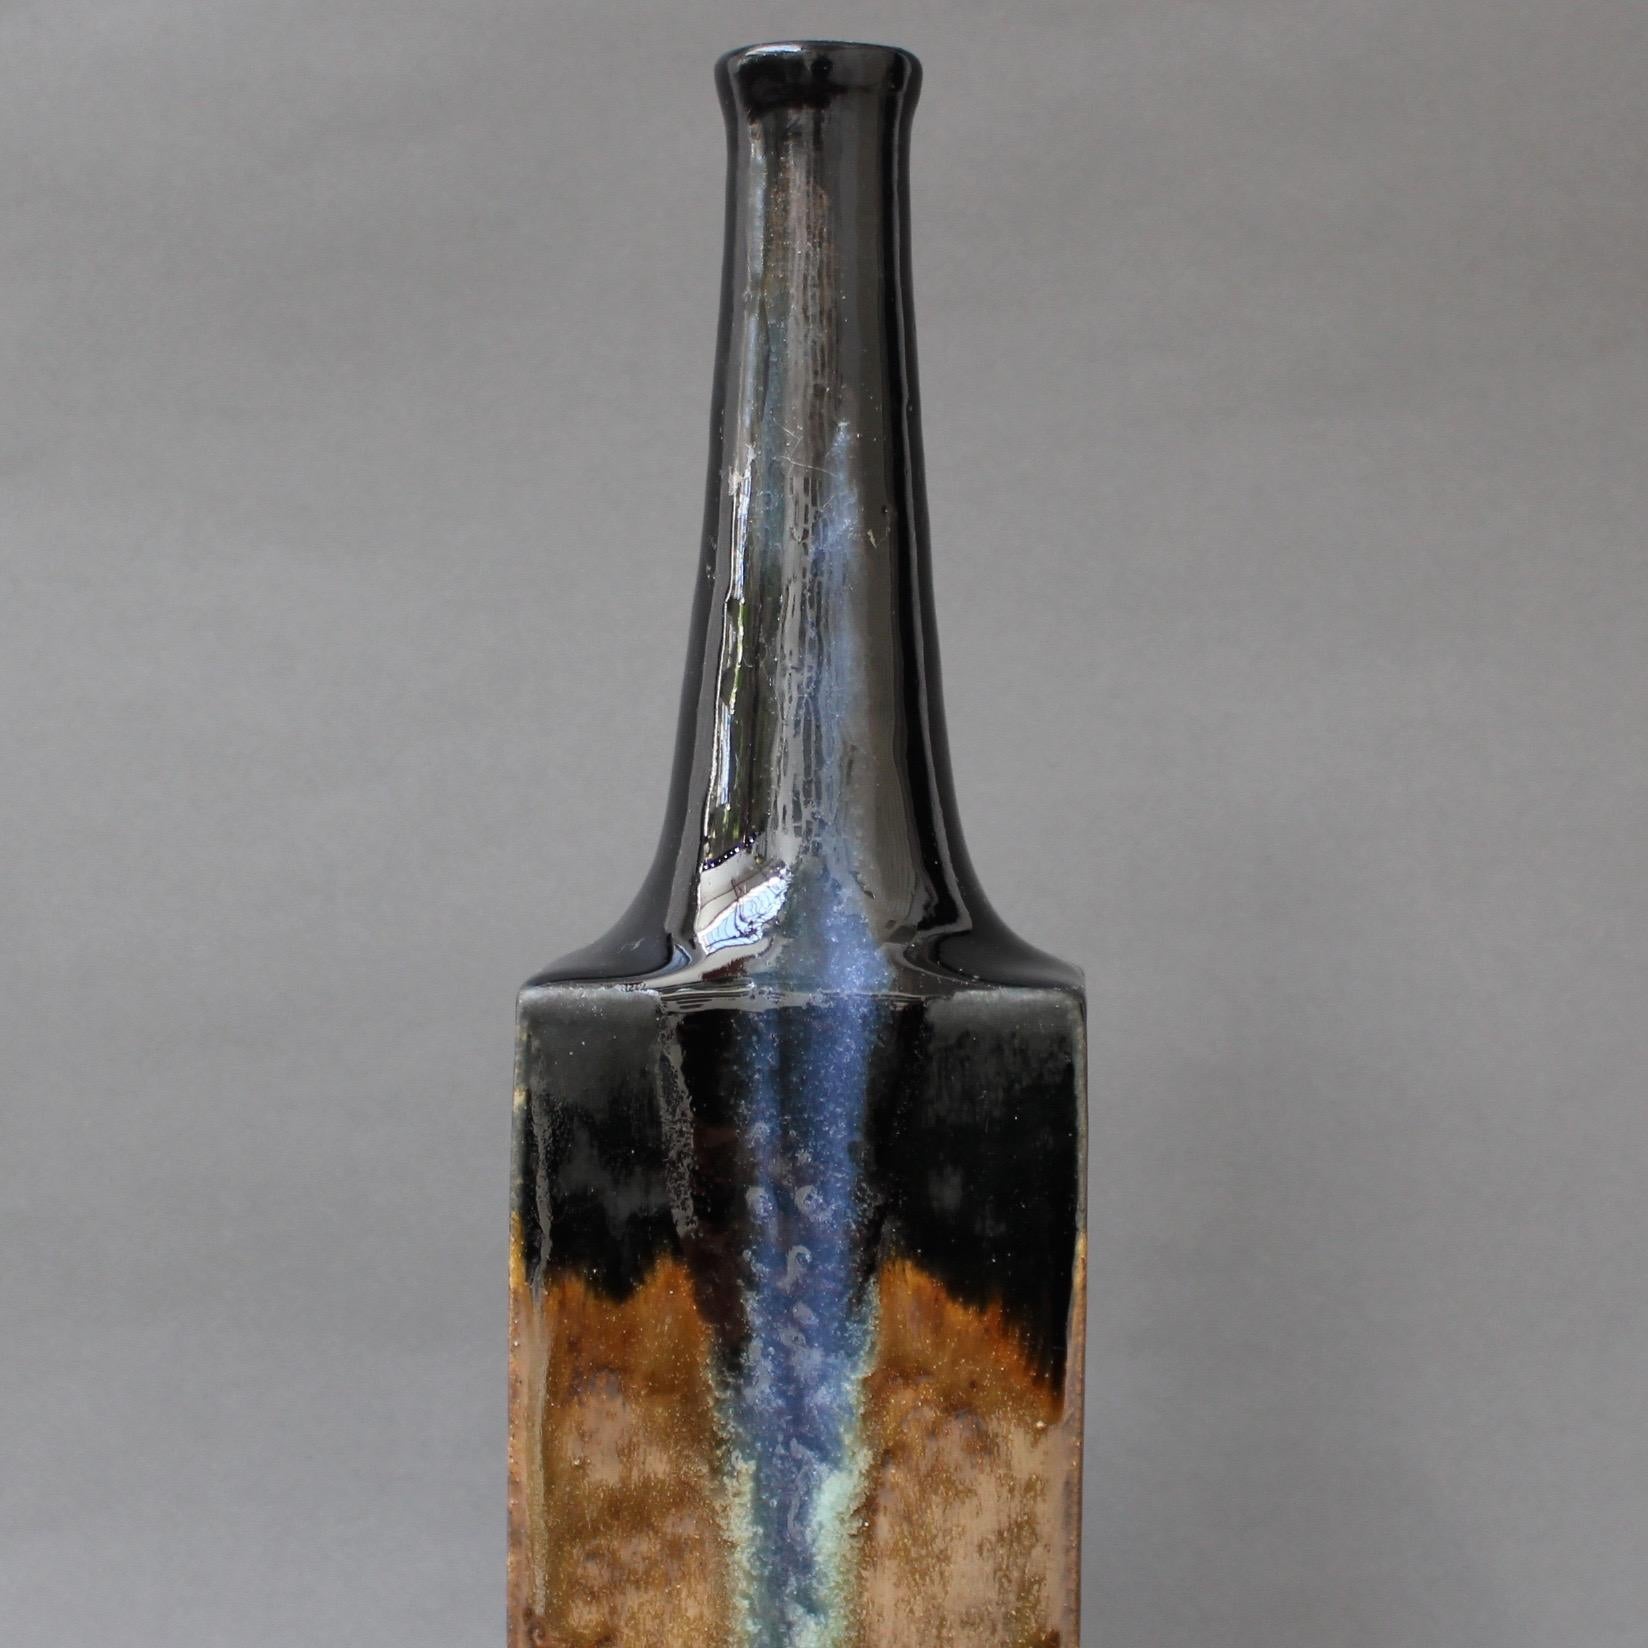 Black and Chocolate Brown Ceramic Bottle-Shaped Vase by Bruno Gambone, c. 1980s For Sale 2